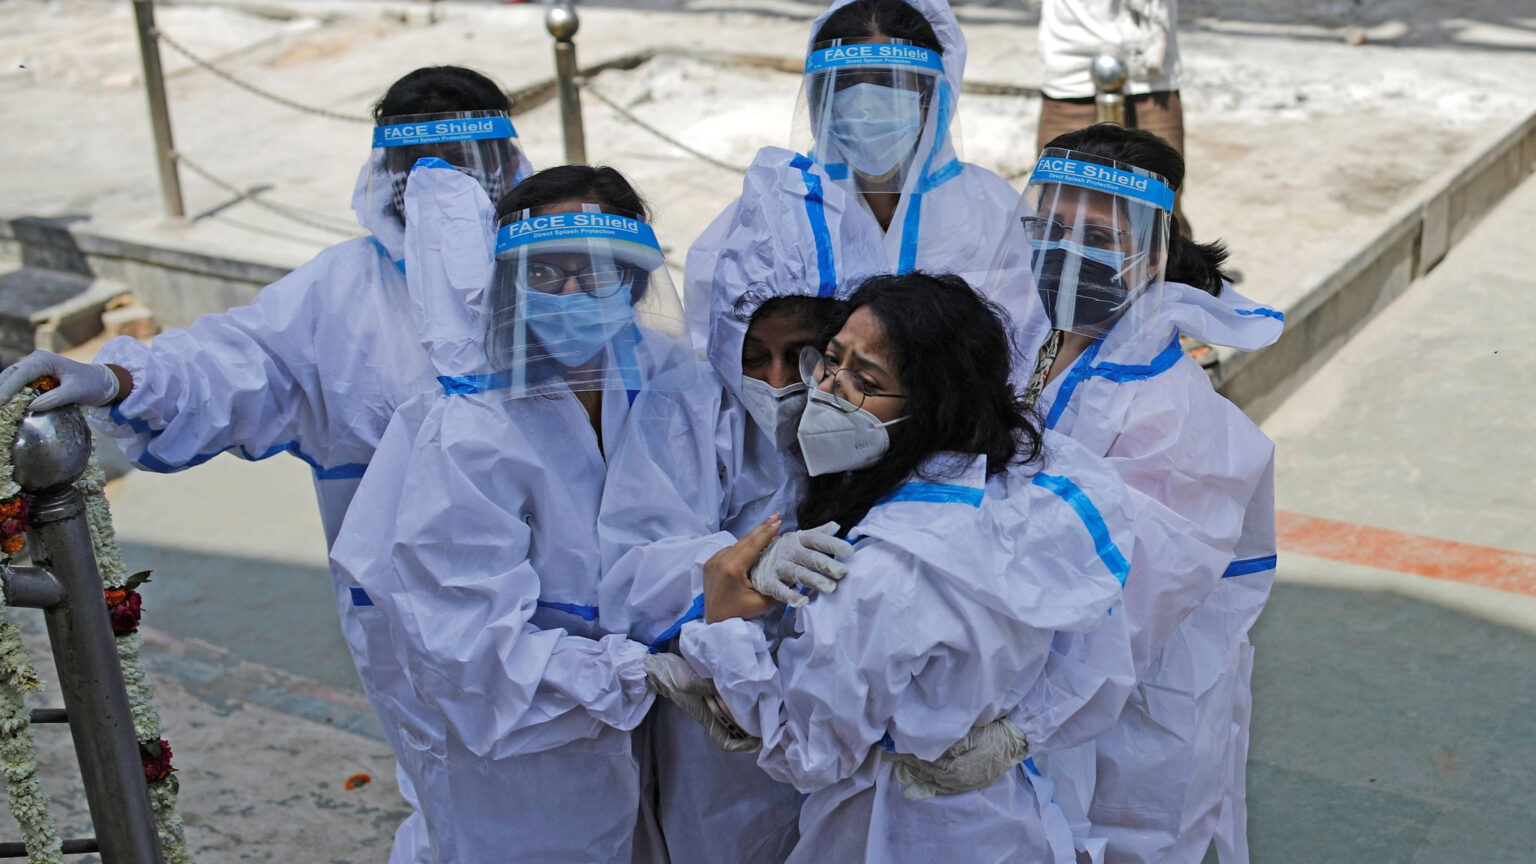 Will travel restrictions to and from India help stop the spread of COVID? See how the pandemic has surged and how global forces are working to fight it.